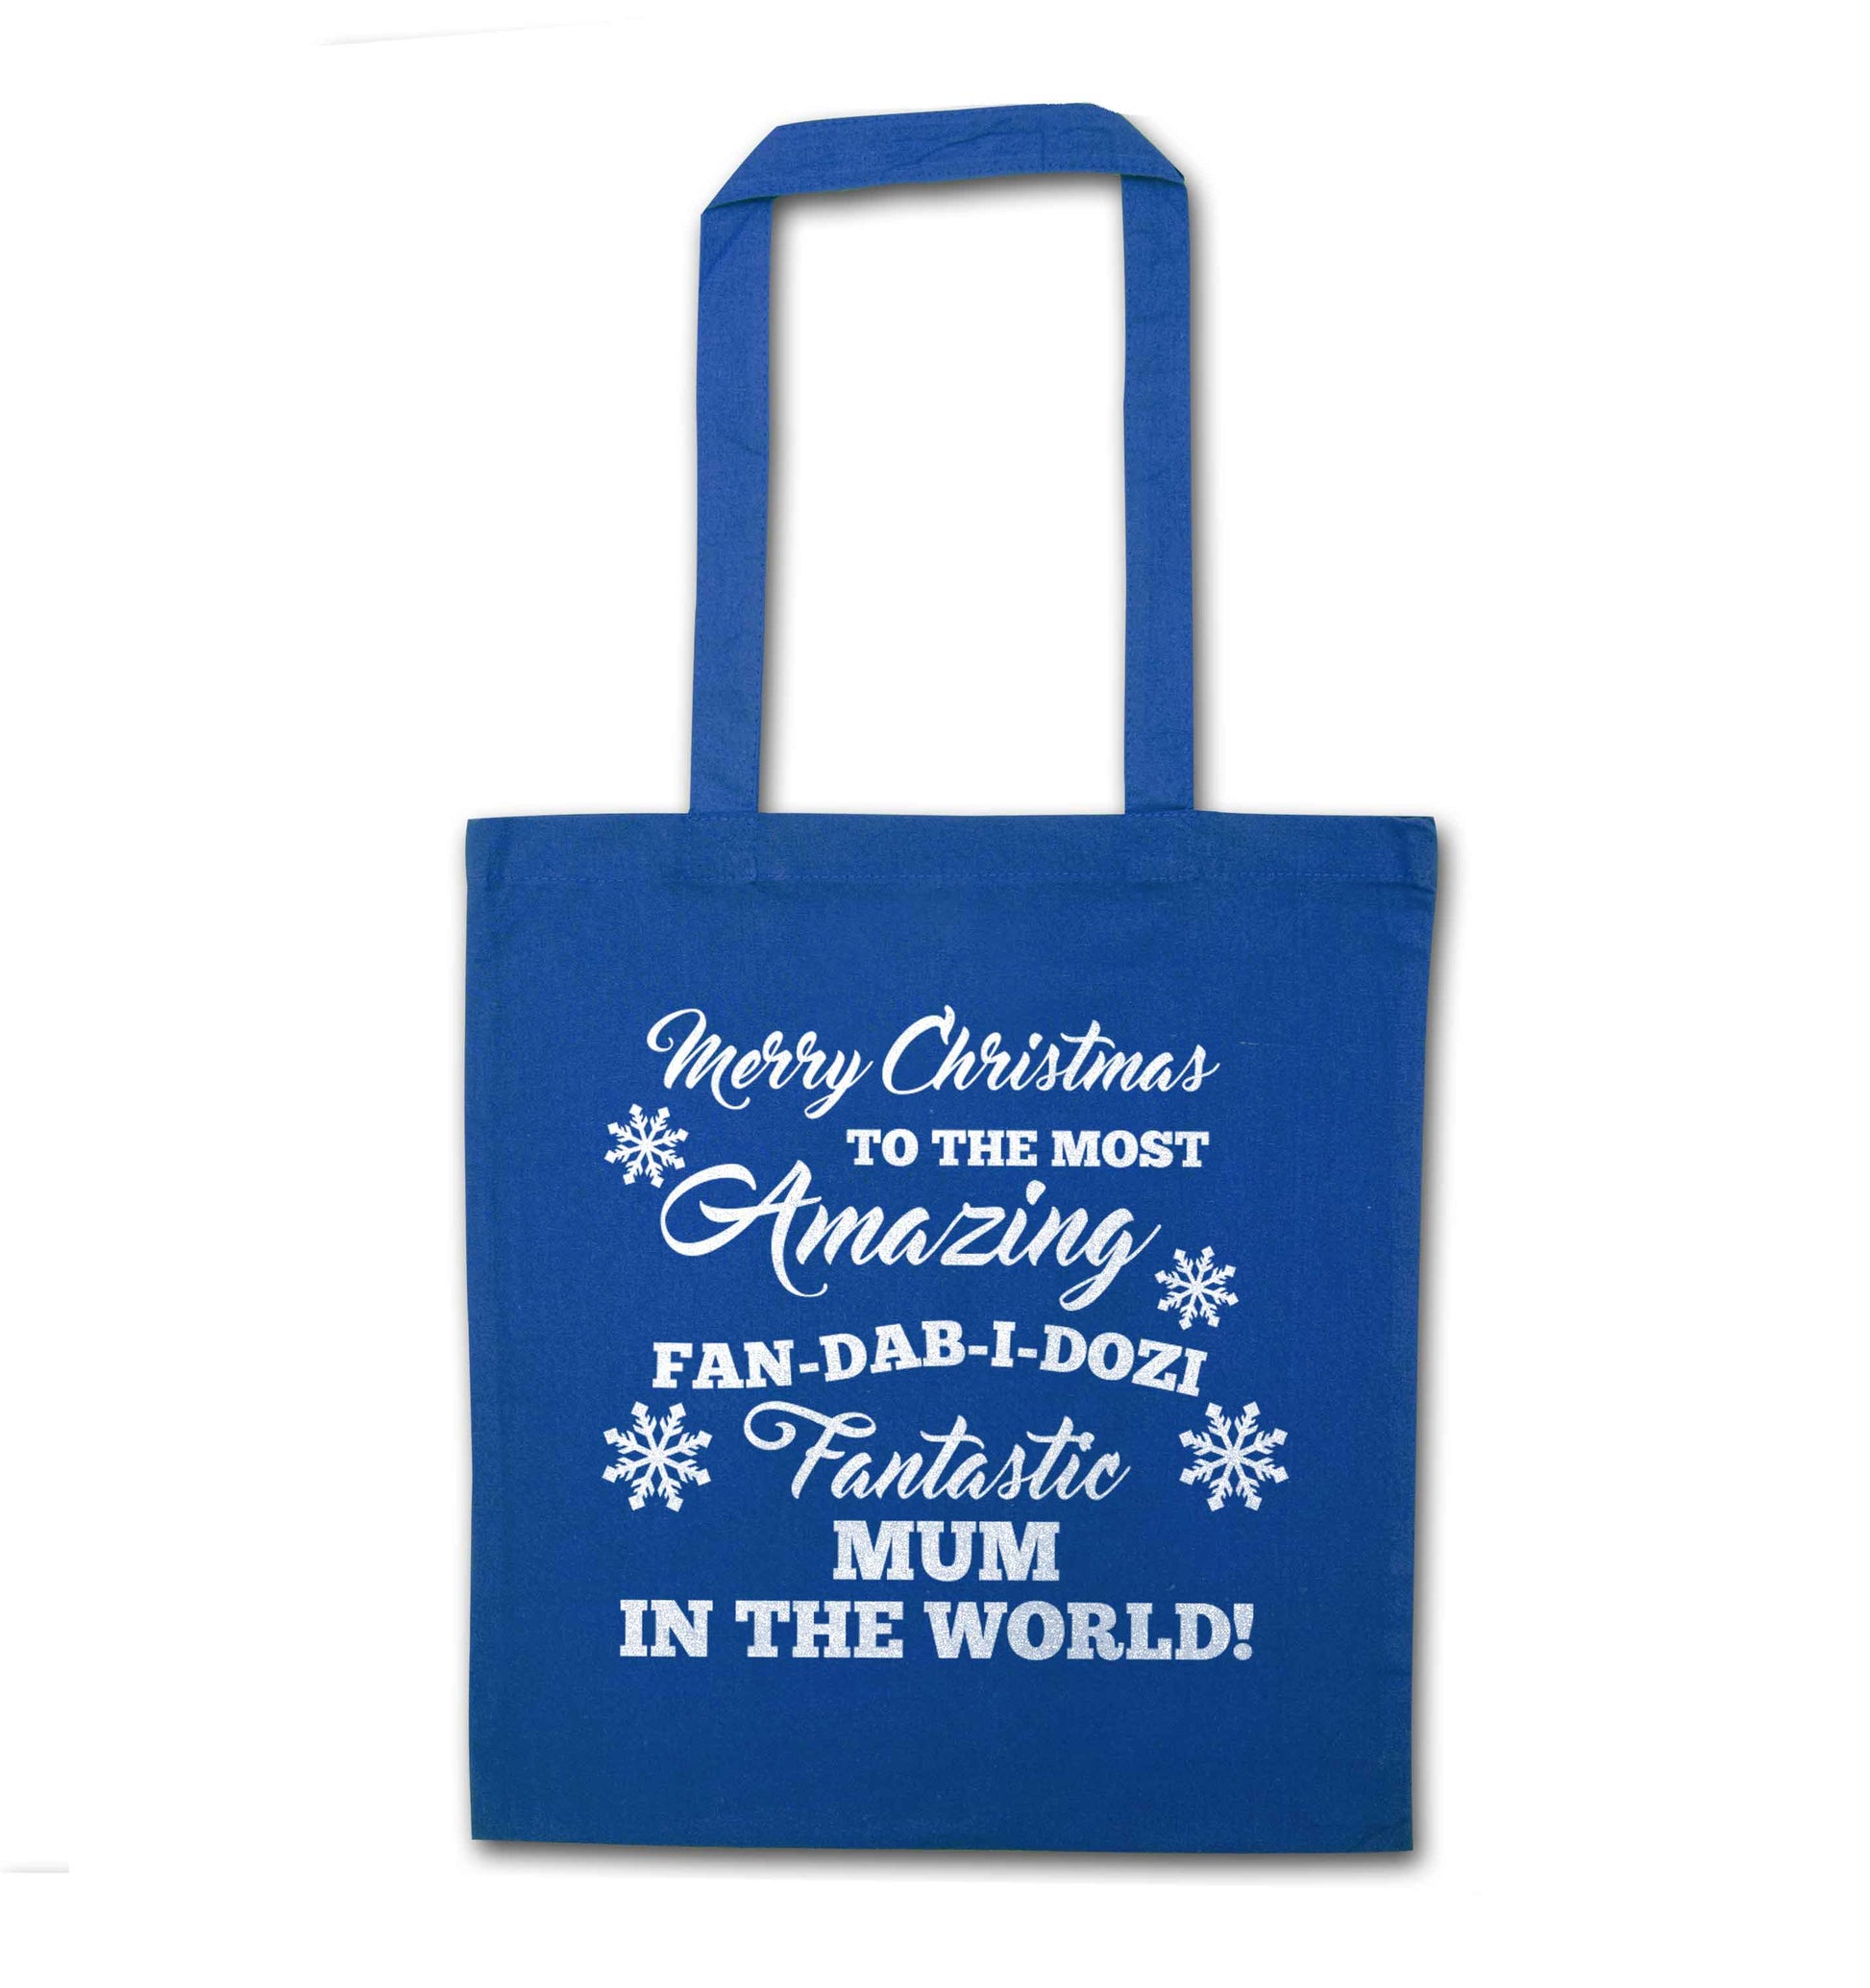 Merry Christmas to the most amazing fan-dab-i-dozi fantasic mum in the world blue tote bag